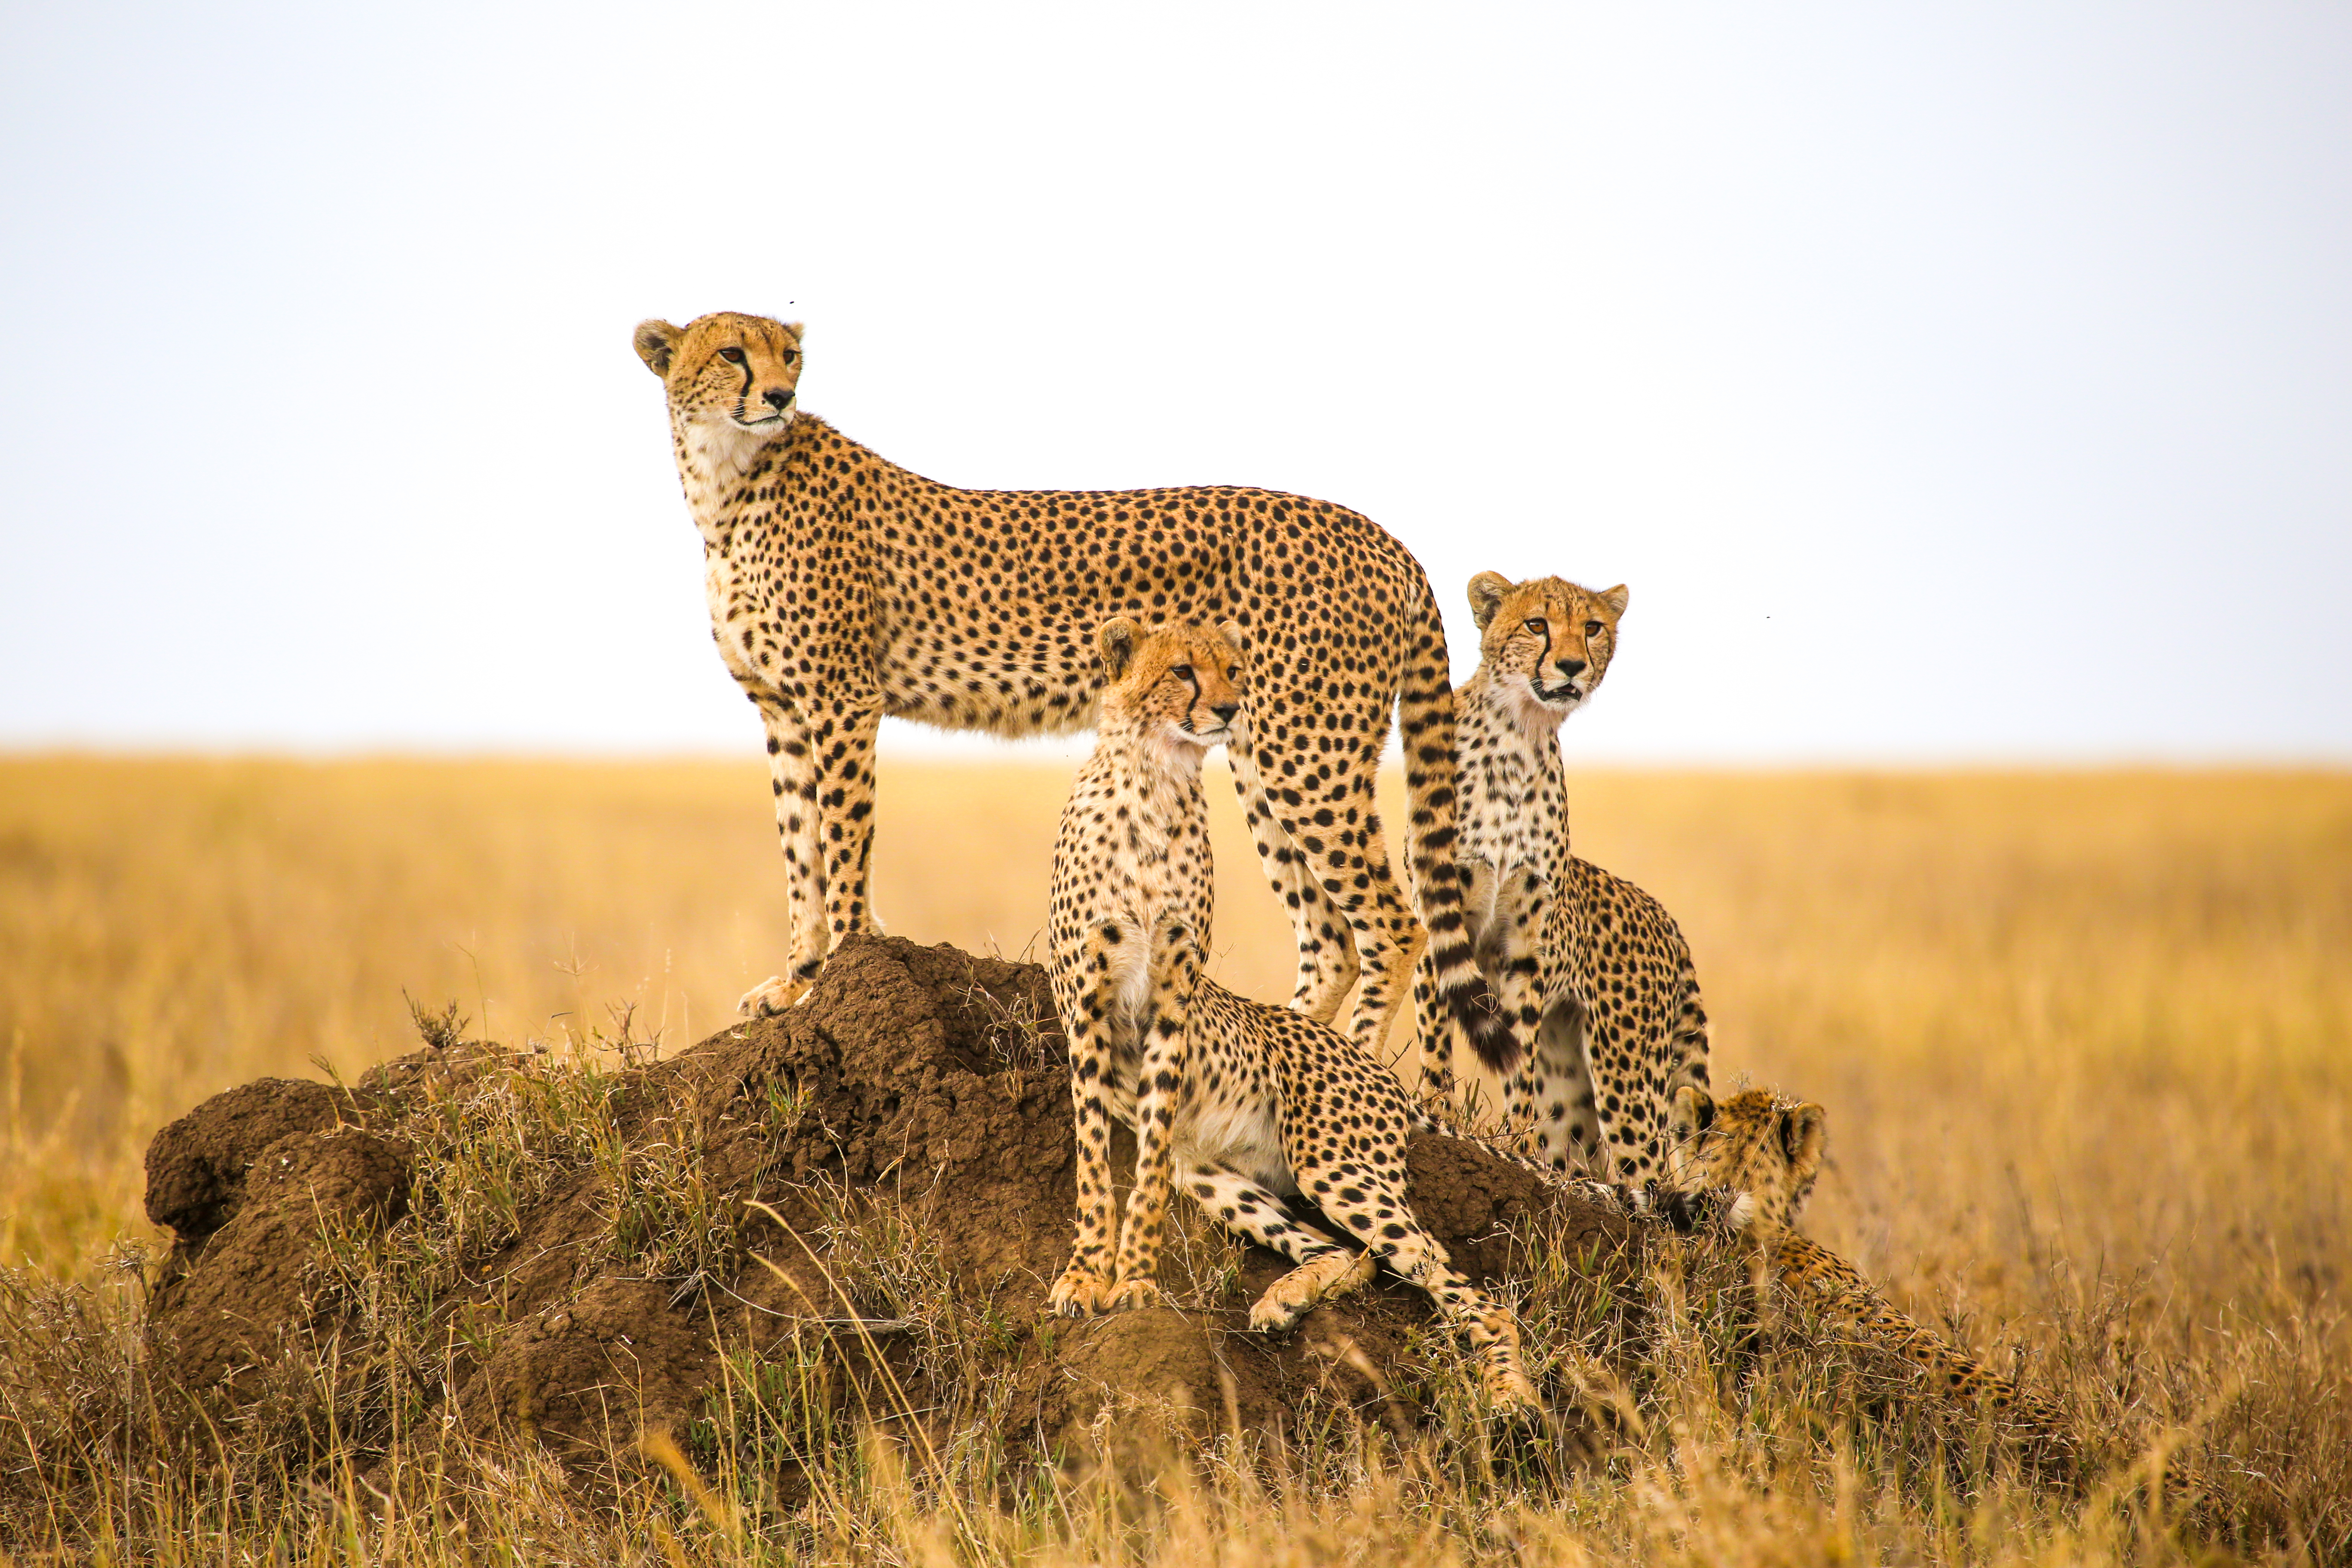 A group of cheetahs in the Serengeti